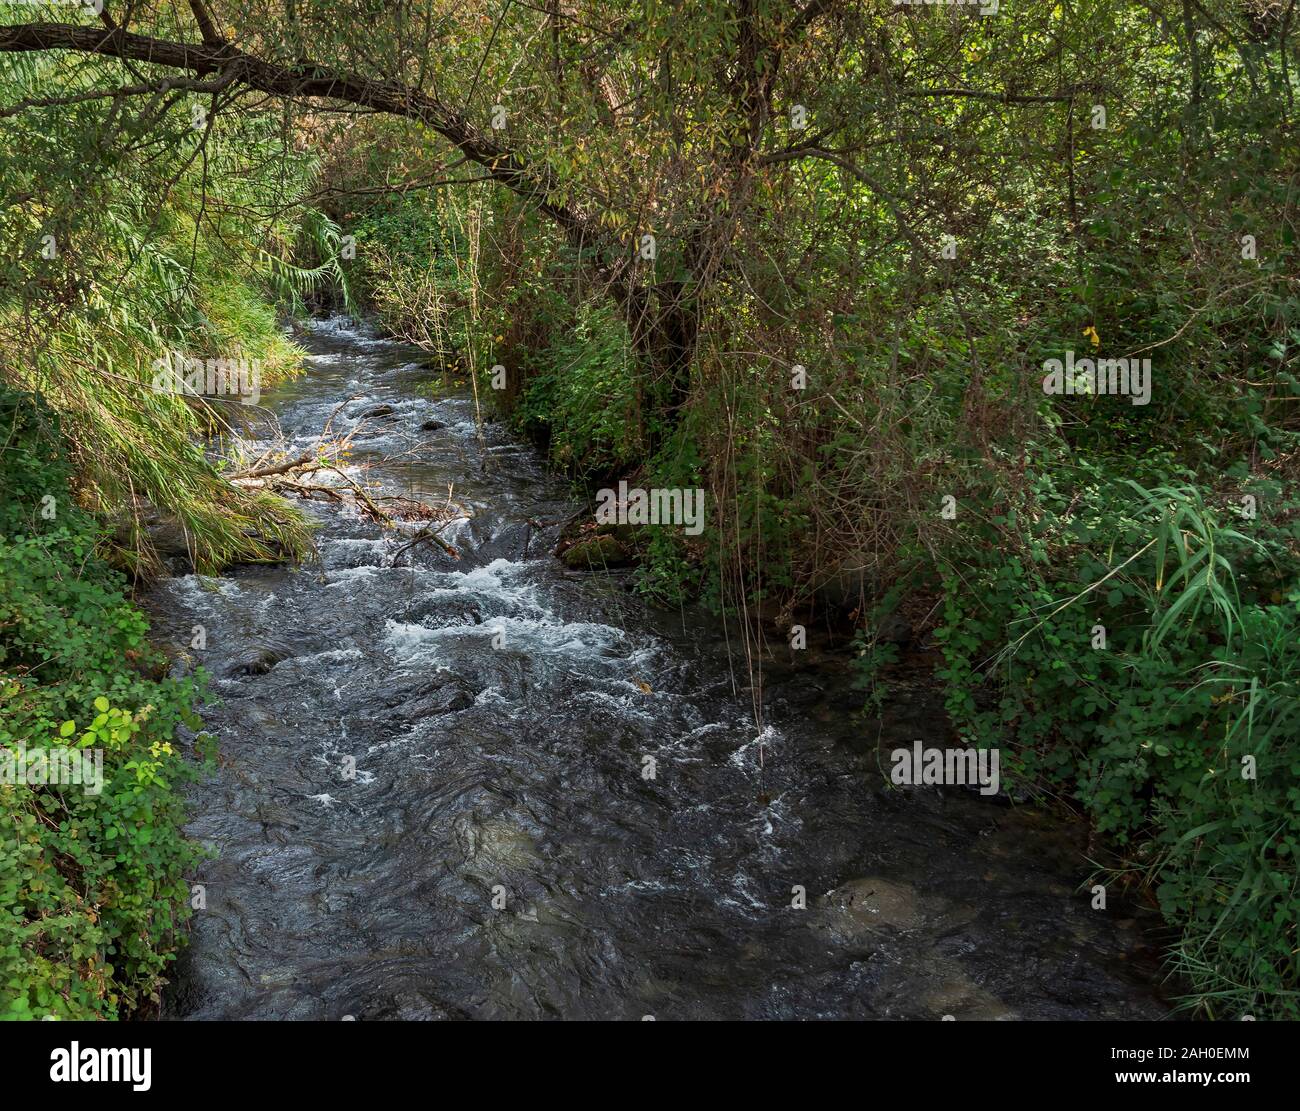 the hermon stream running through a tangled overgrown subtrobical forest in the banias nature reserve in the golan heights inisrael Stock Photo